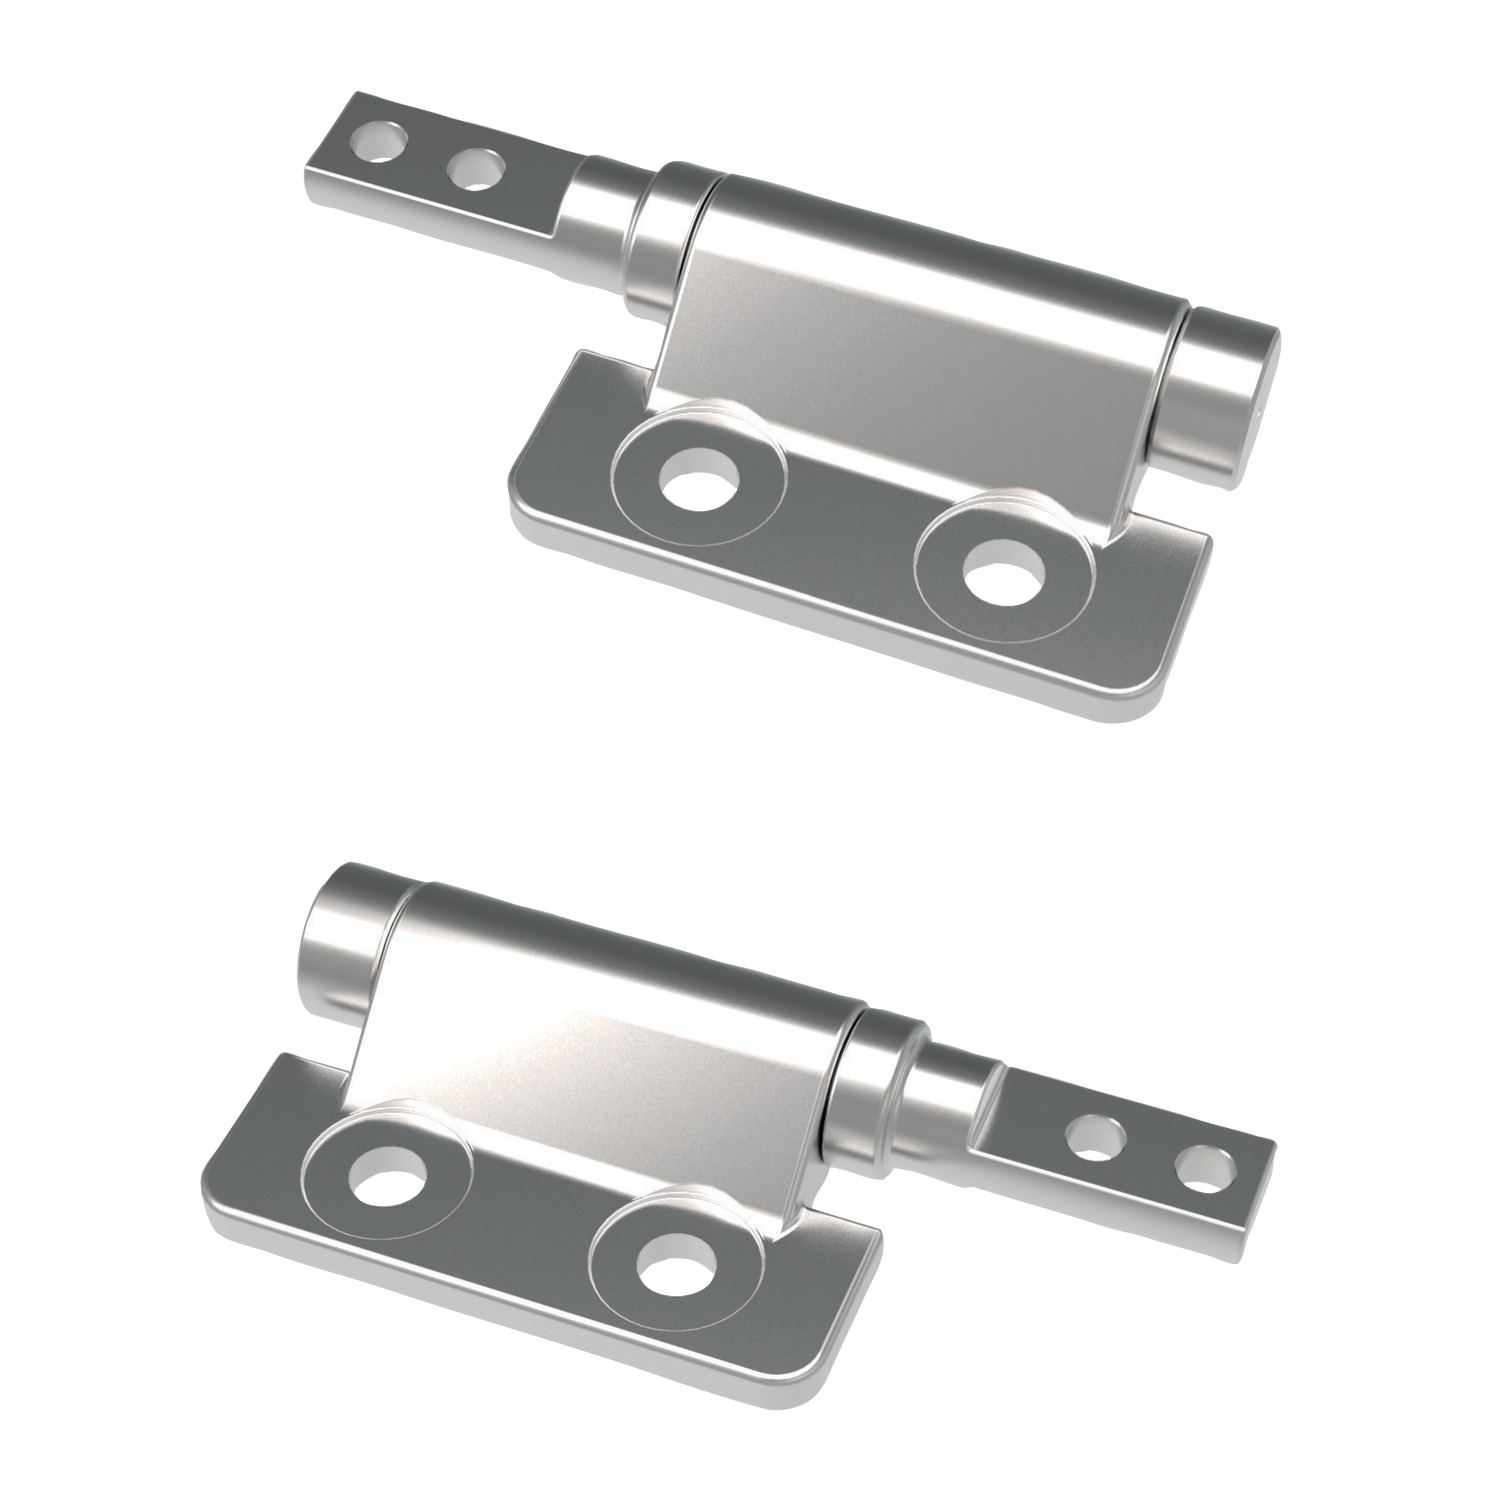 Friction Hinges Asymmetric torque friction hinges - 0,0 to 3,4 Nm. Plain bore.